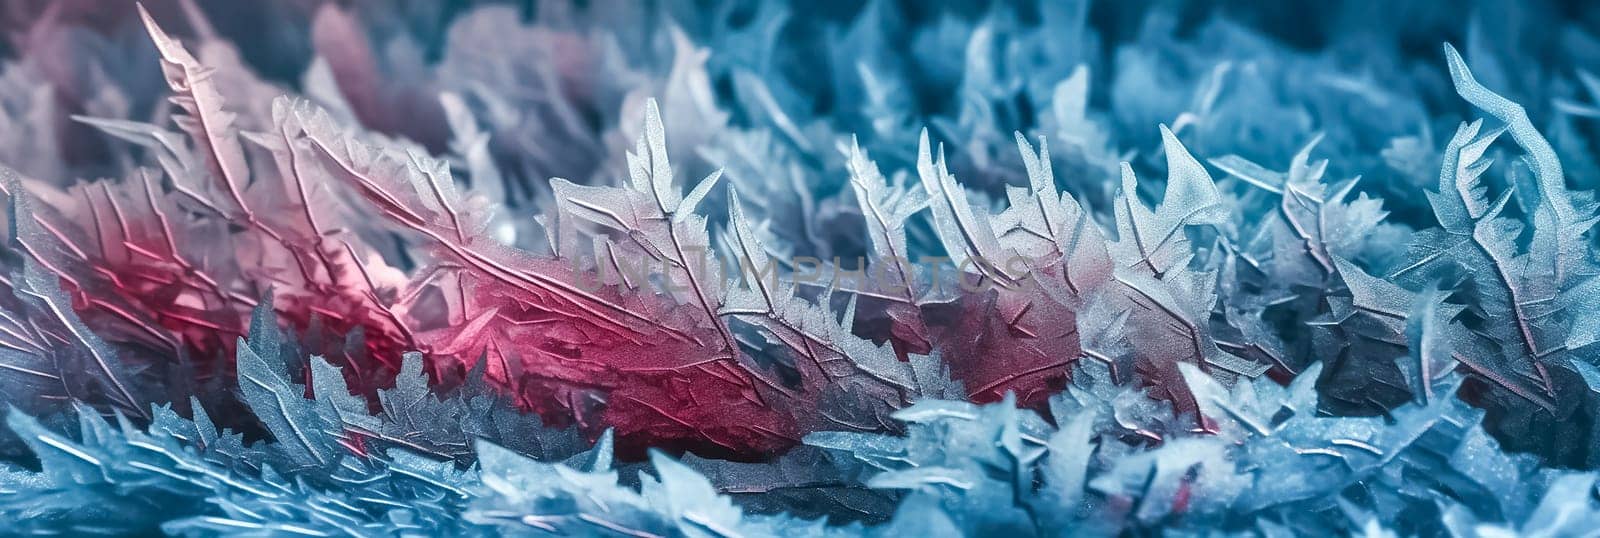 Colorful abstract crystals of ice background. Crystals toned in blue and pink colors. Precious crystals background by esvetleishaya